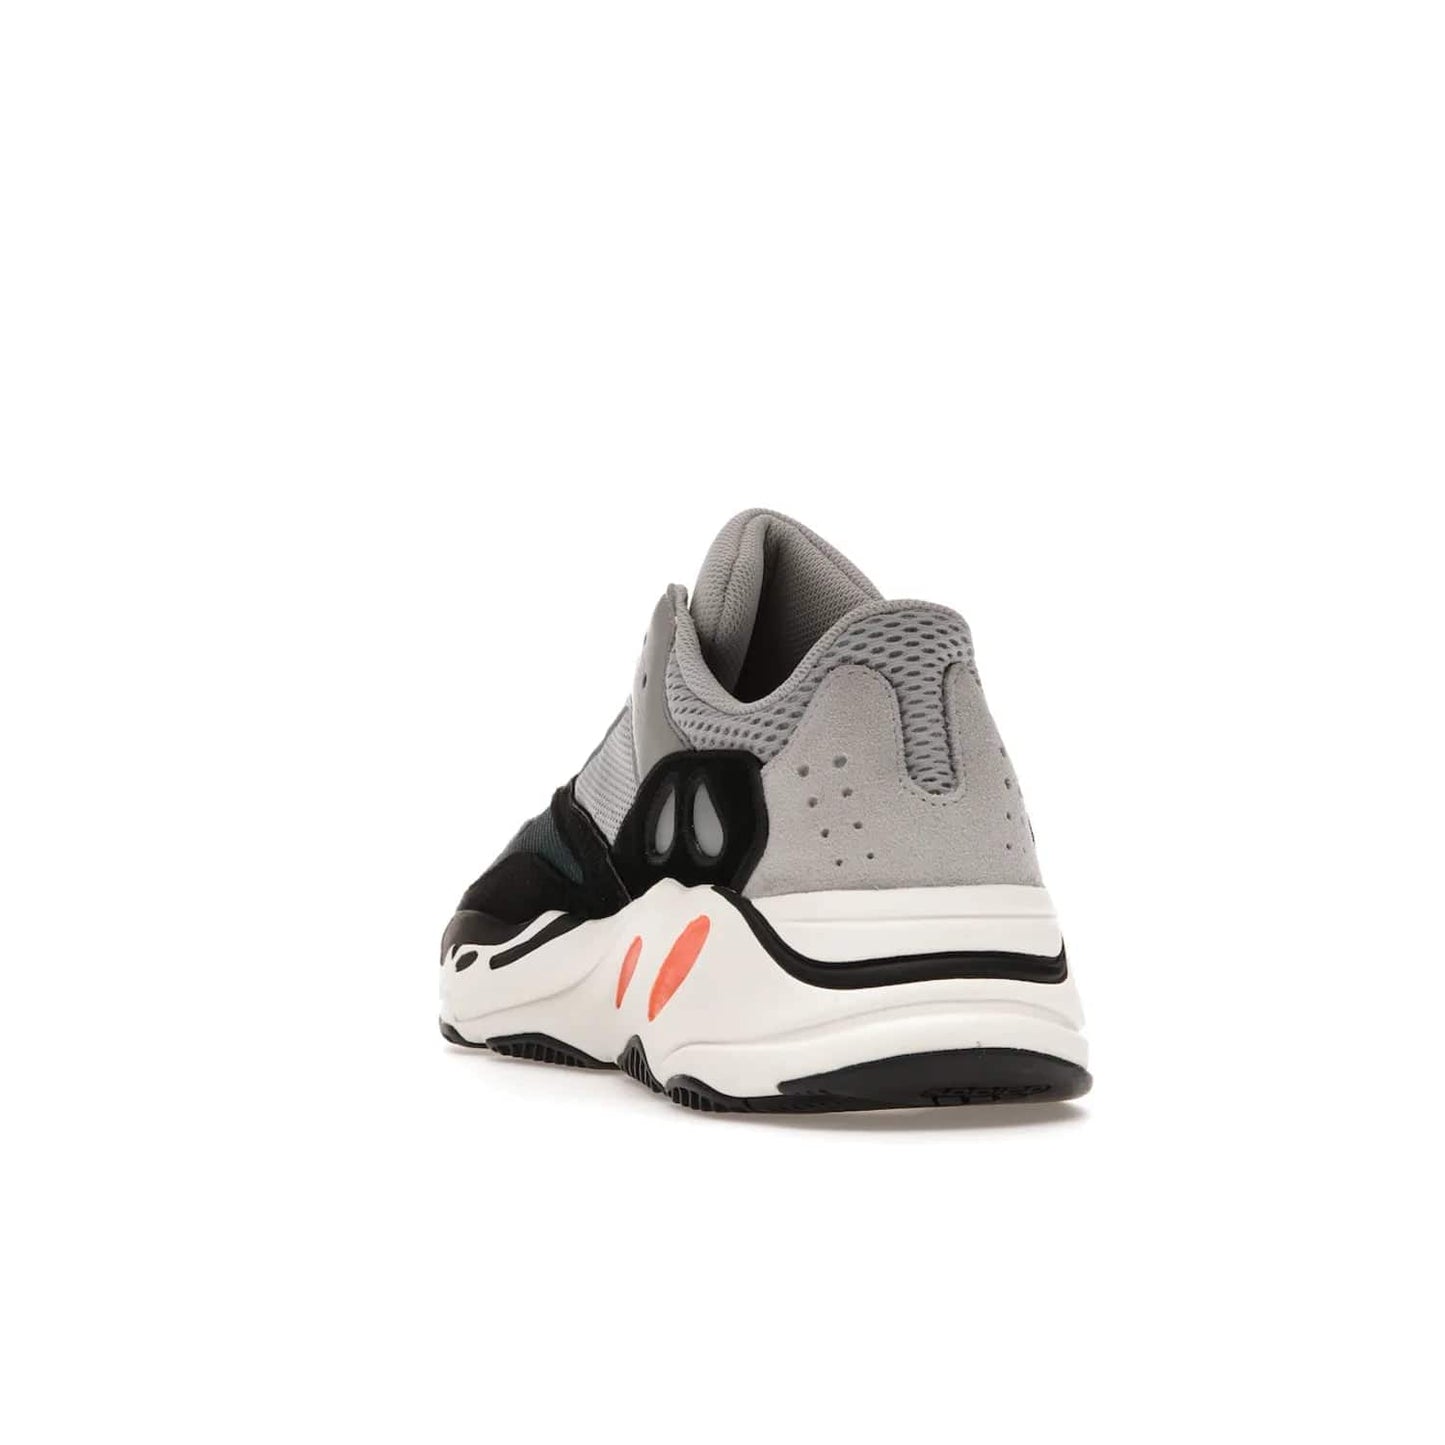 adidas Yeezy Boost 700 Wave Runner - Image 26 - Only at www.BallersClubKickz.com - Shop the iconic adidas Yeezy Boost 700 Wave Runner. Featuring grey mesh and leather upper, black suede overlays, teal mesh underlays, and signature Boost sole. Be bold & make a statement.